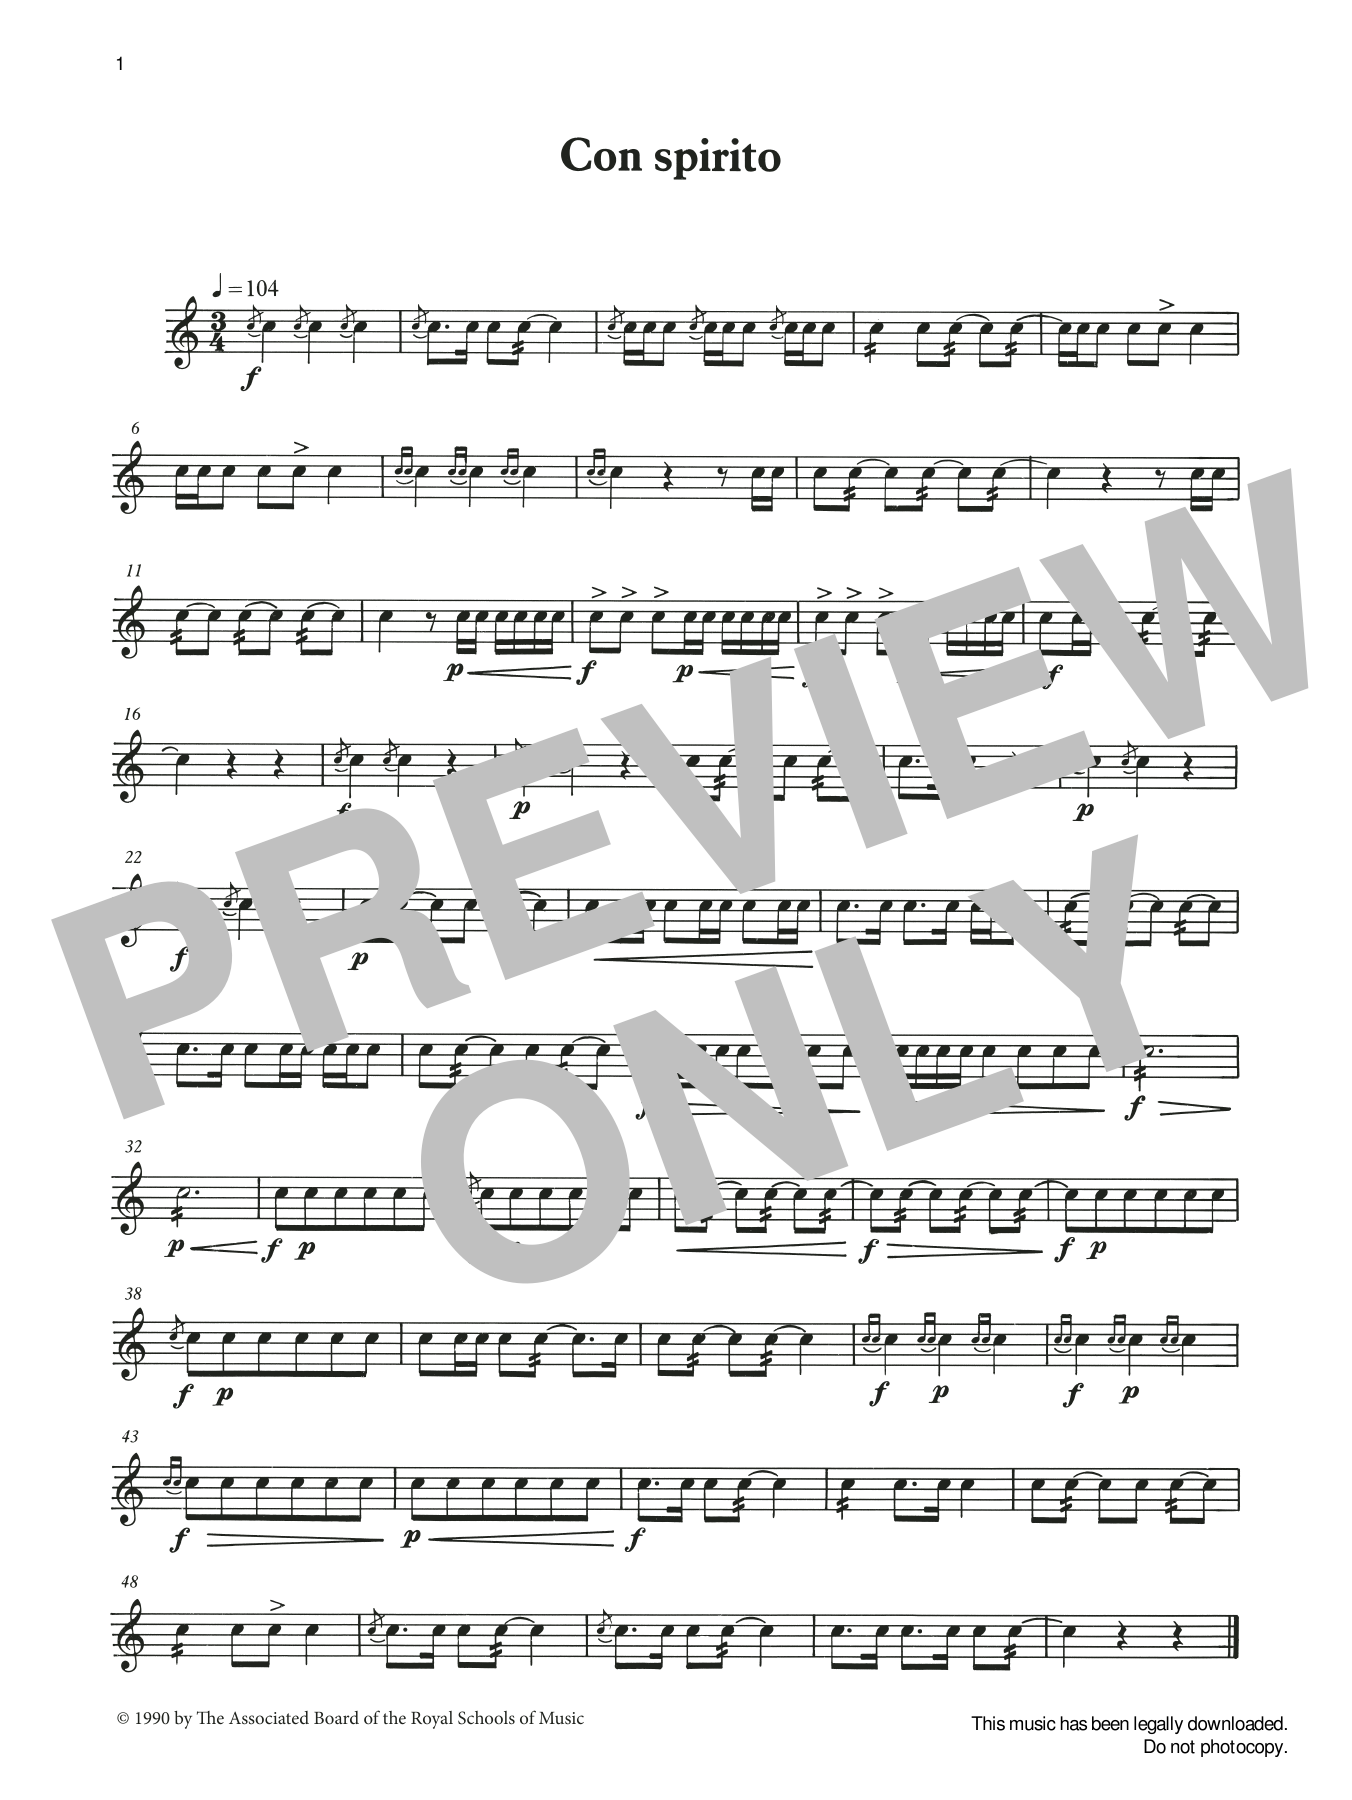 Download Ian Wright and Kevin Hathaway Con spirito from Graded Music for Snare Sheet Music